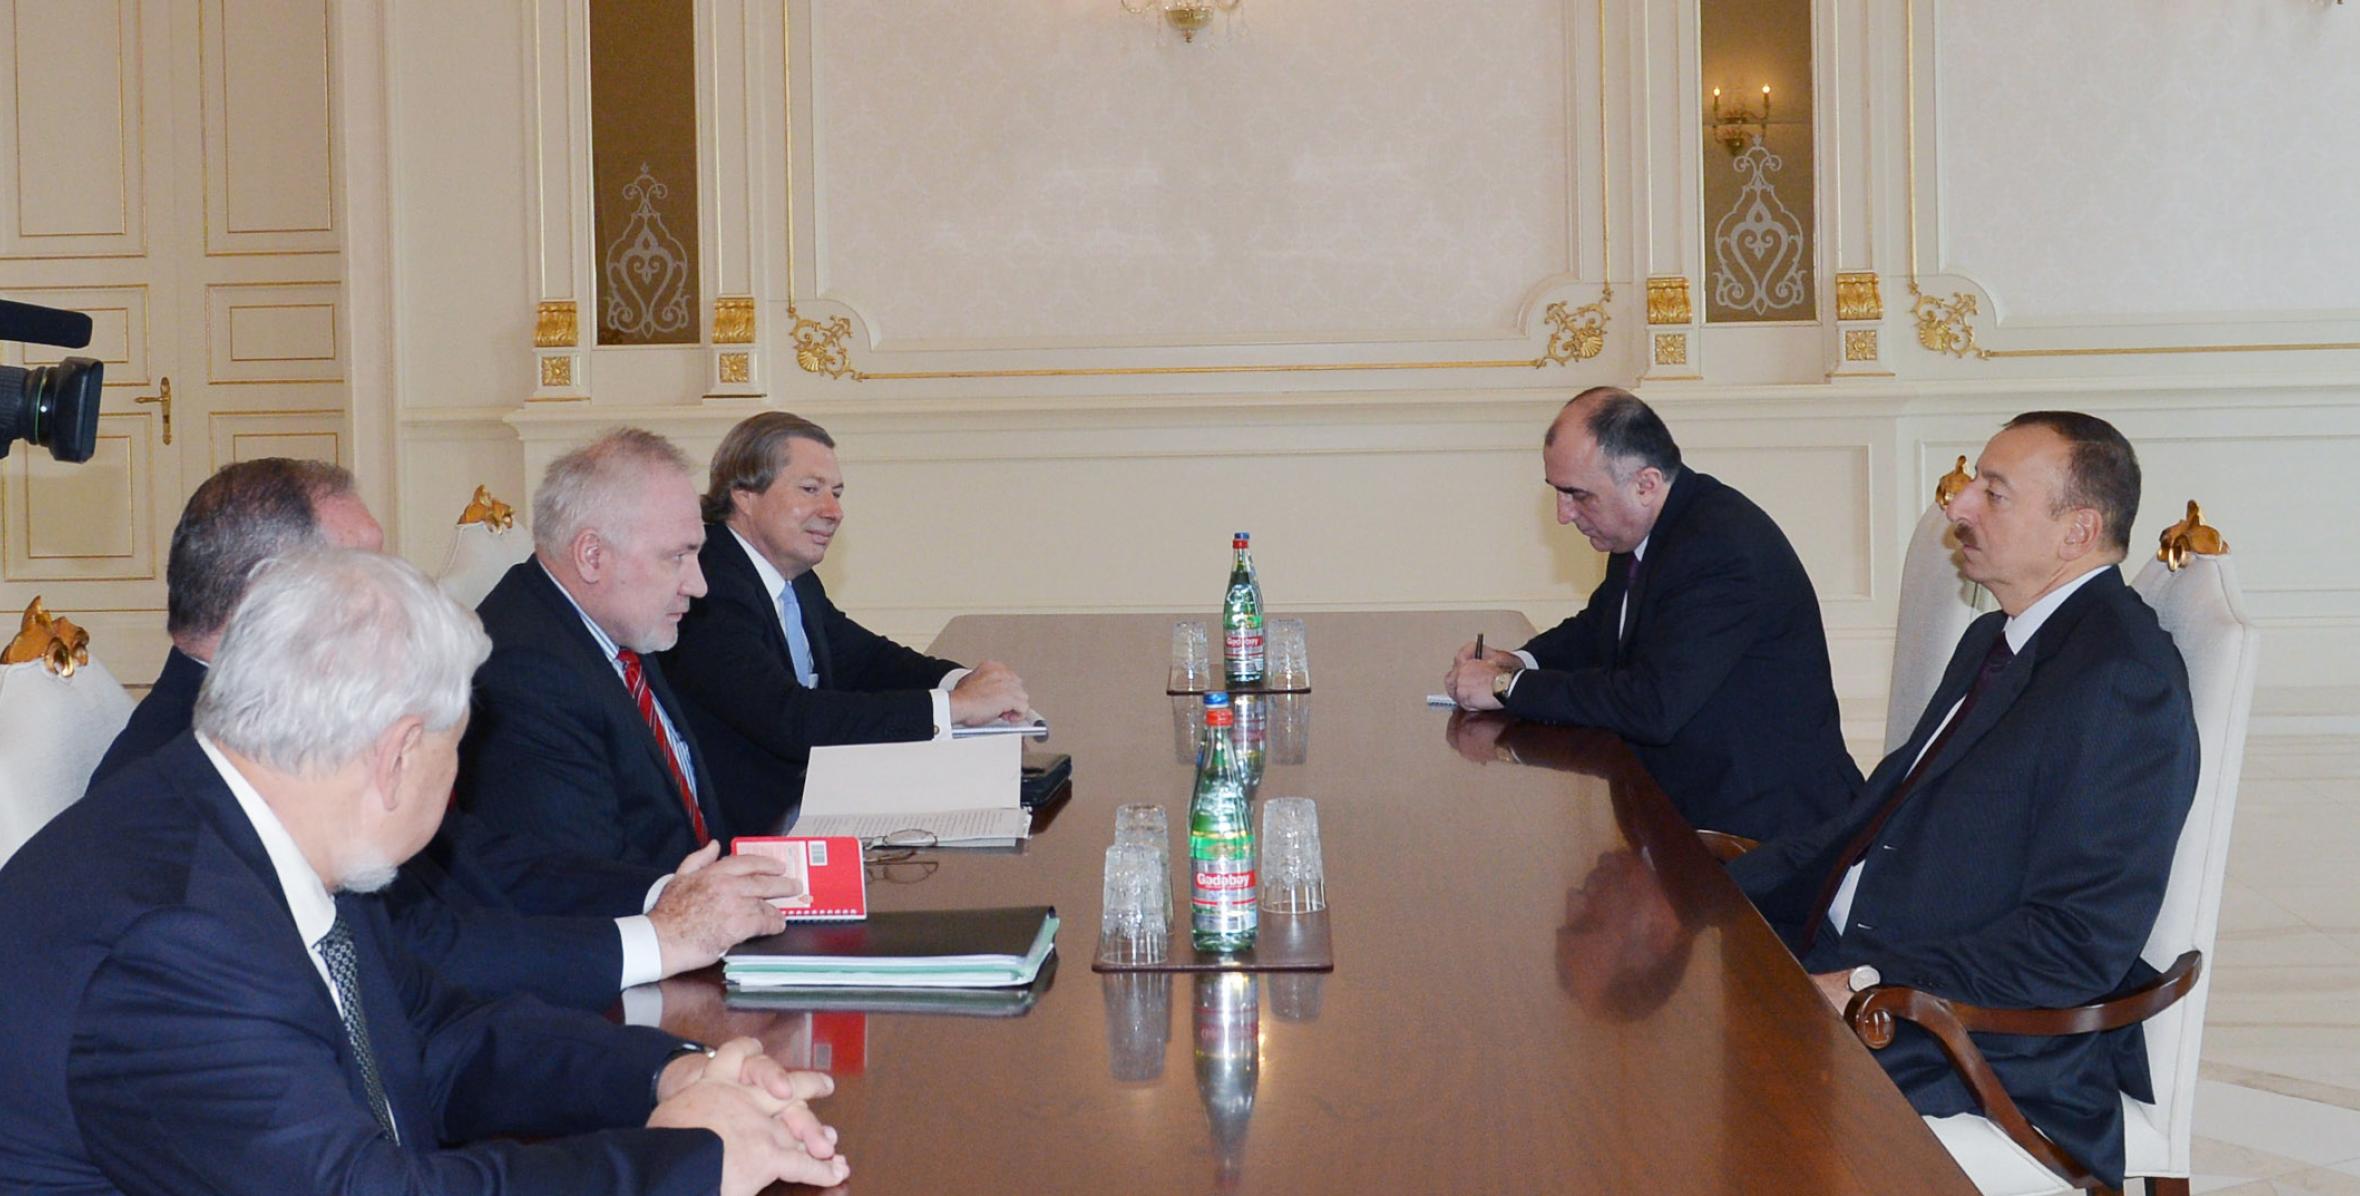 Ilham Aliyev received the co-chairs of the OSCE Minsk Group and the Personal Representative of the OSCE Chairman-in-Office